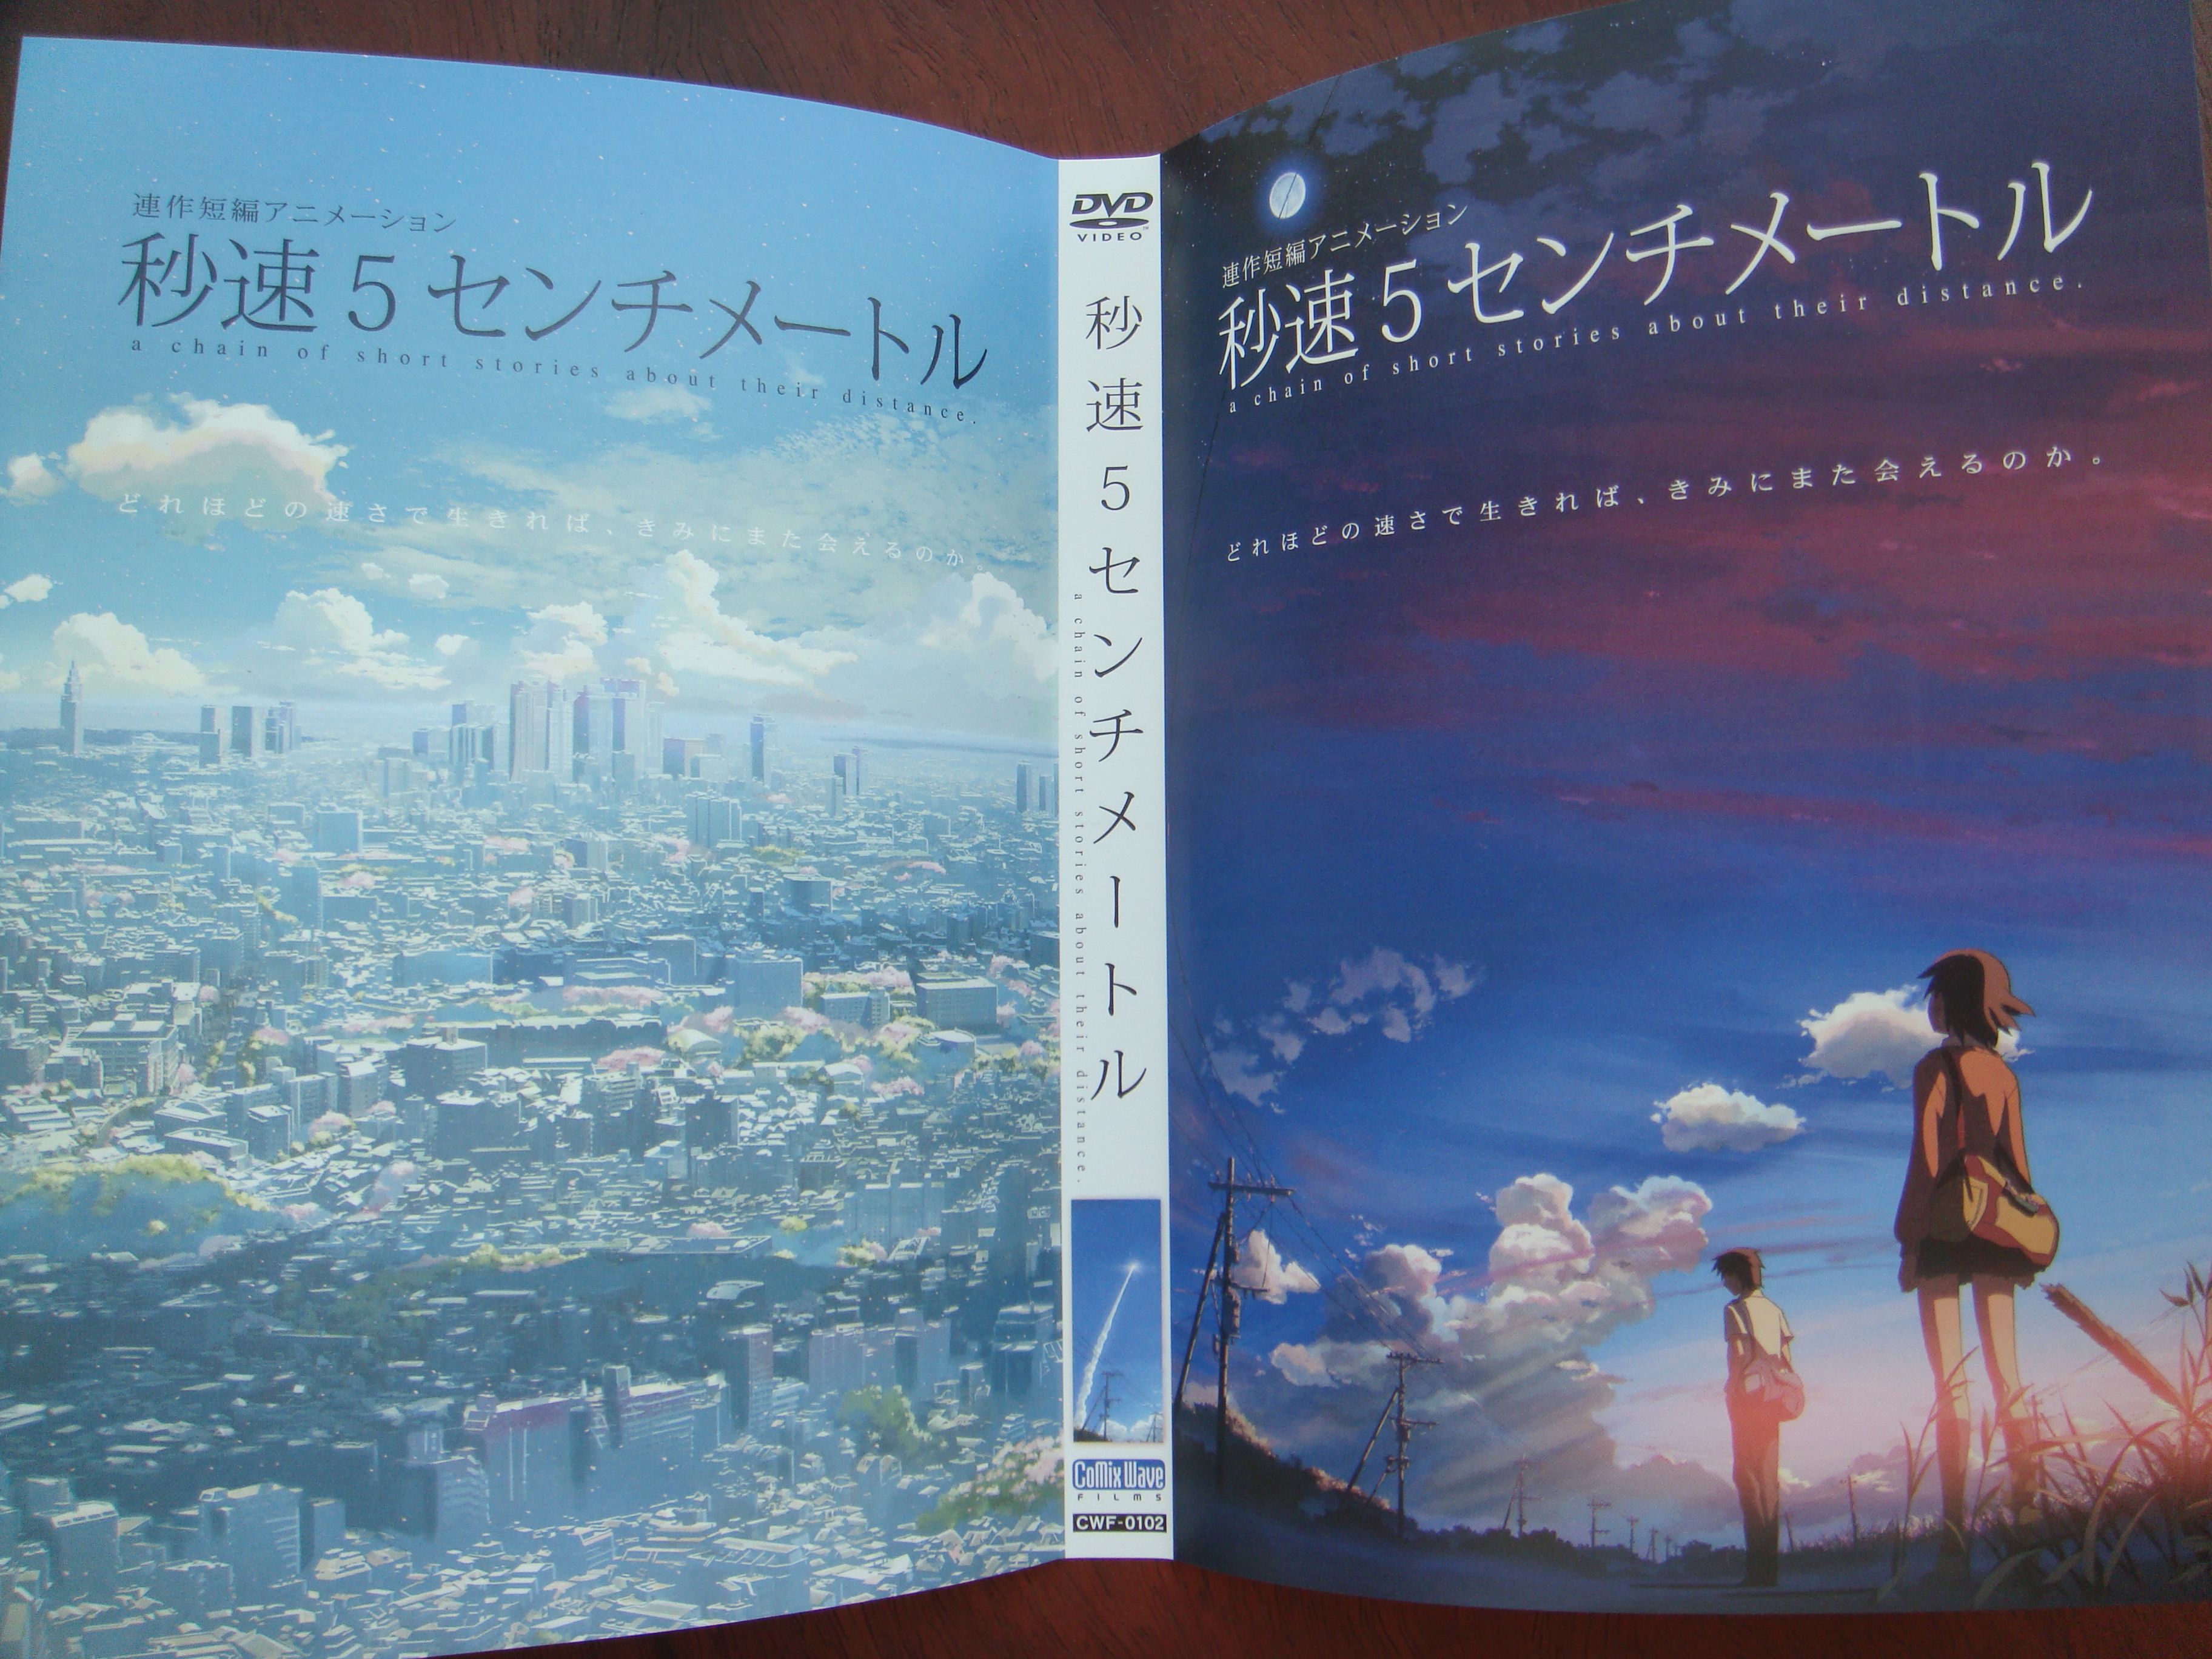 5 Centimeters Per Second Special Edition Japan Dvd Set Review ディエゴの日々